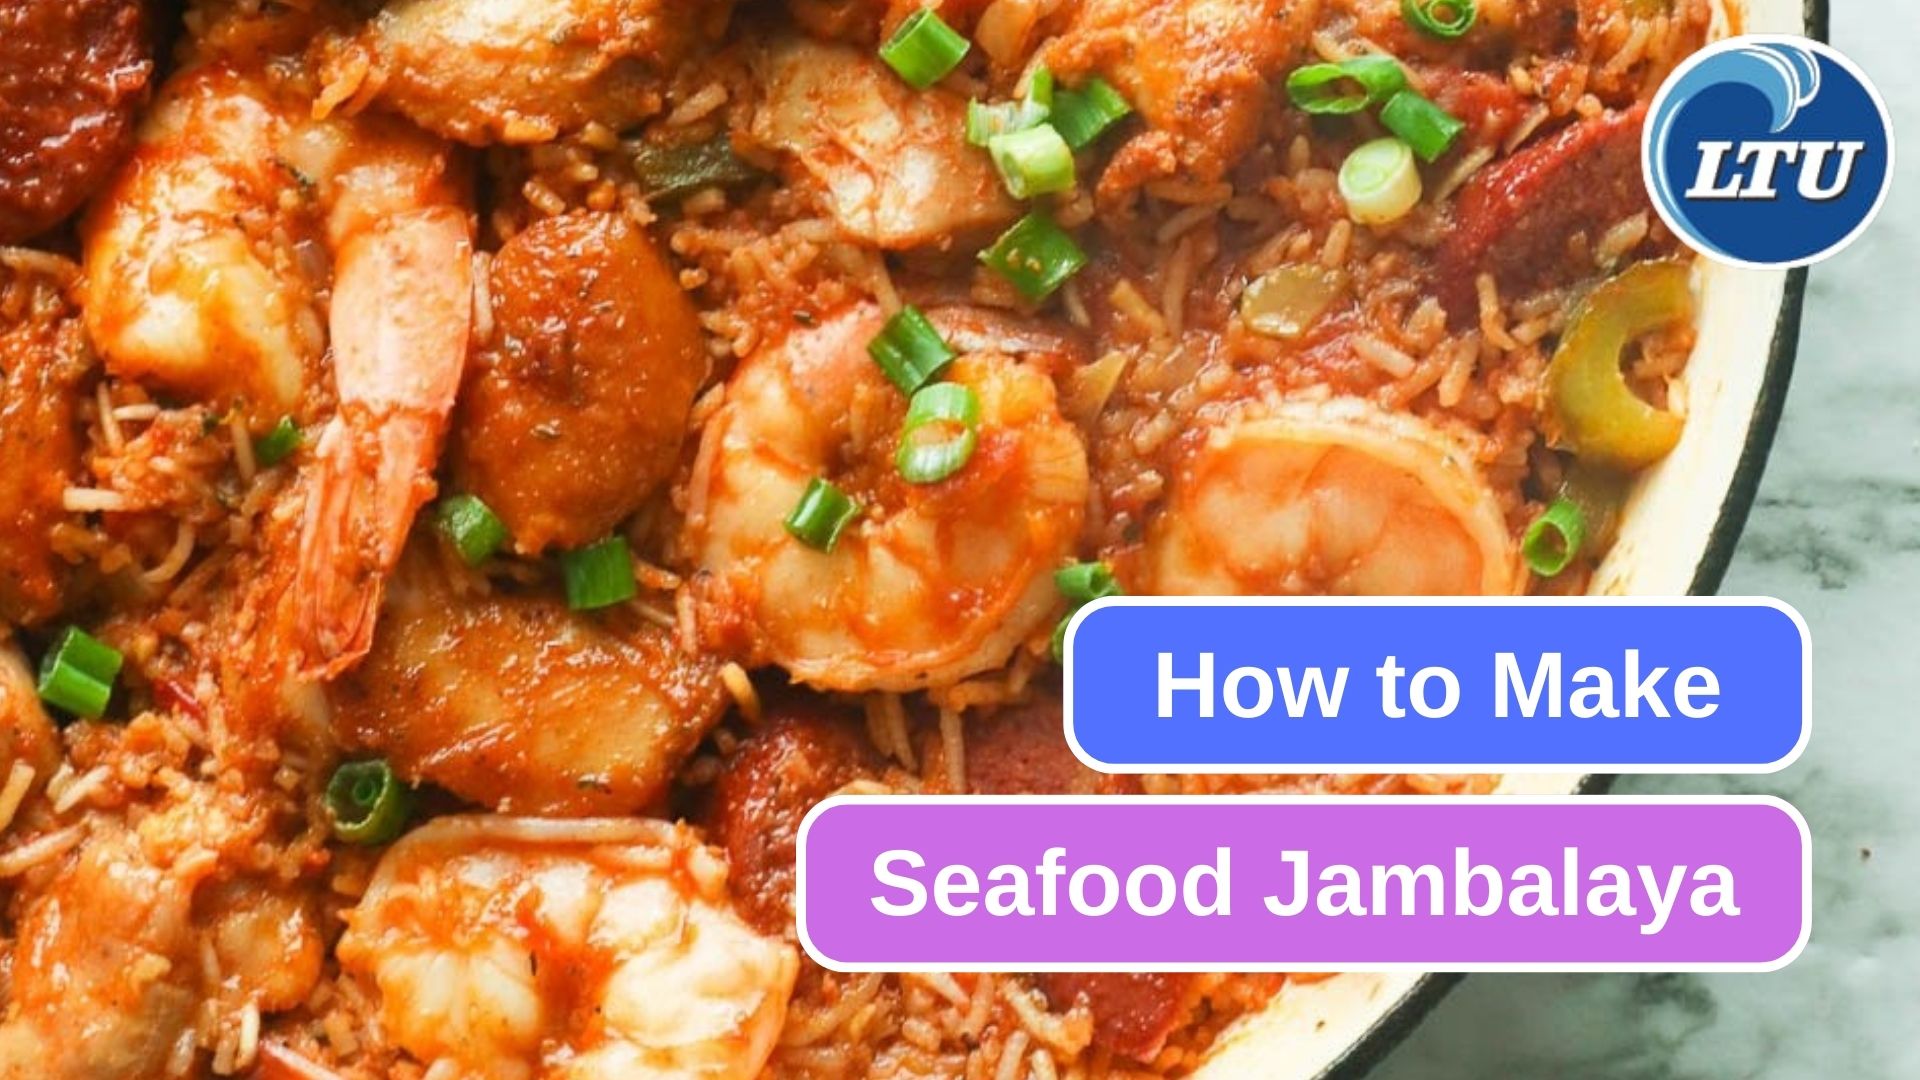 Delicious Seafood Jambalaya Recipe to Try at Home